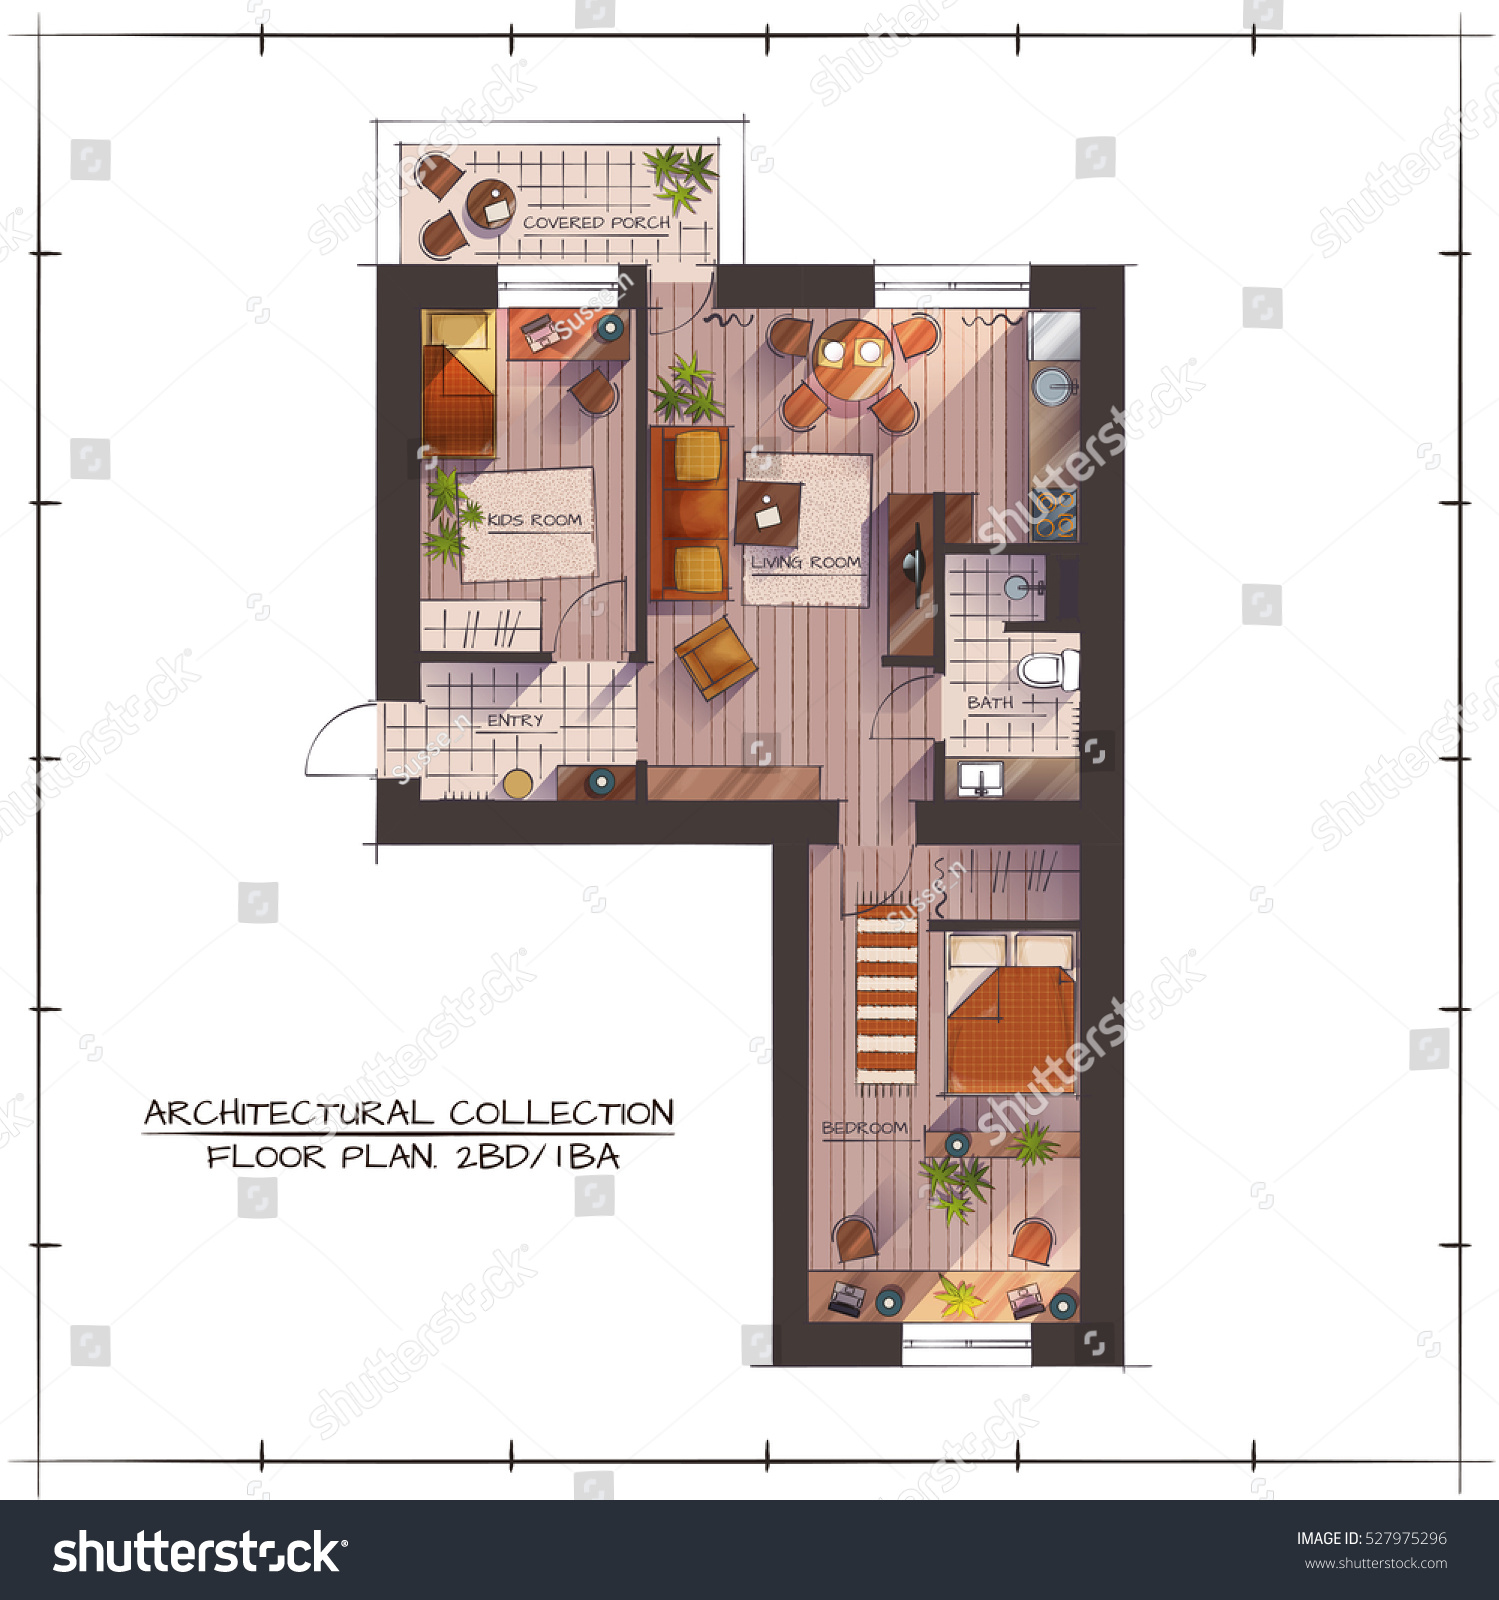 Architectural Color Floor Plan One Bedroom Royalty Free